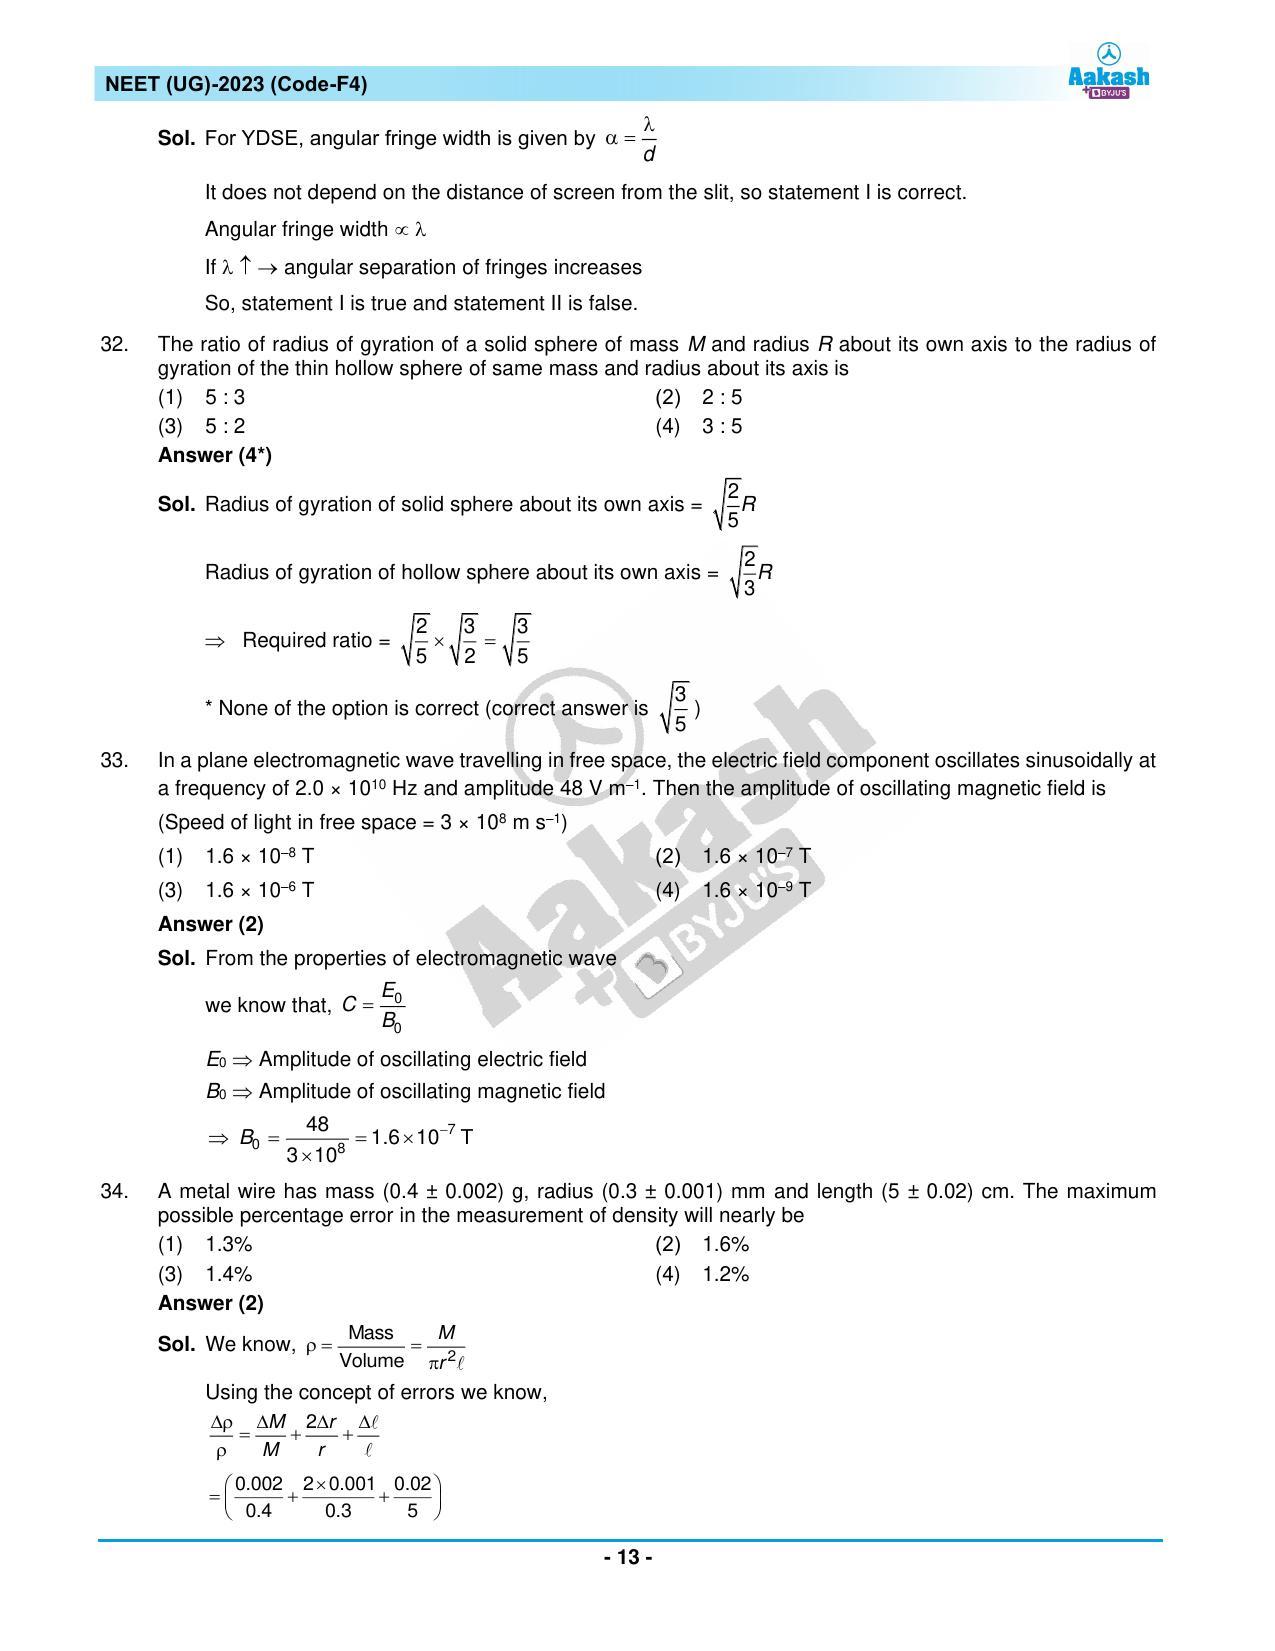 NEET 2023 Question Paper F4 - Page 13